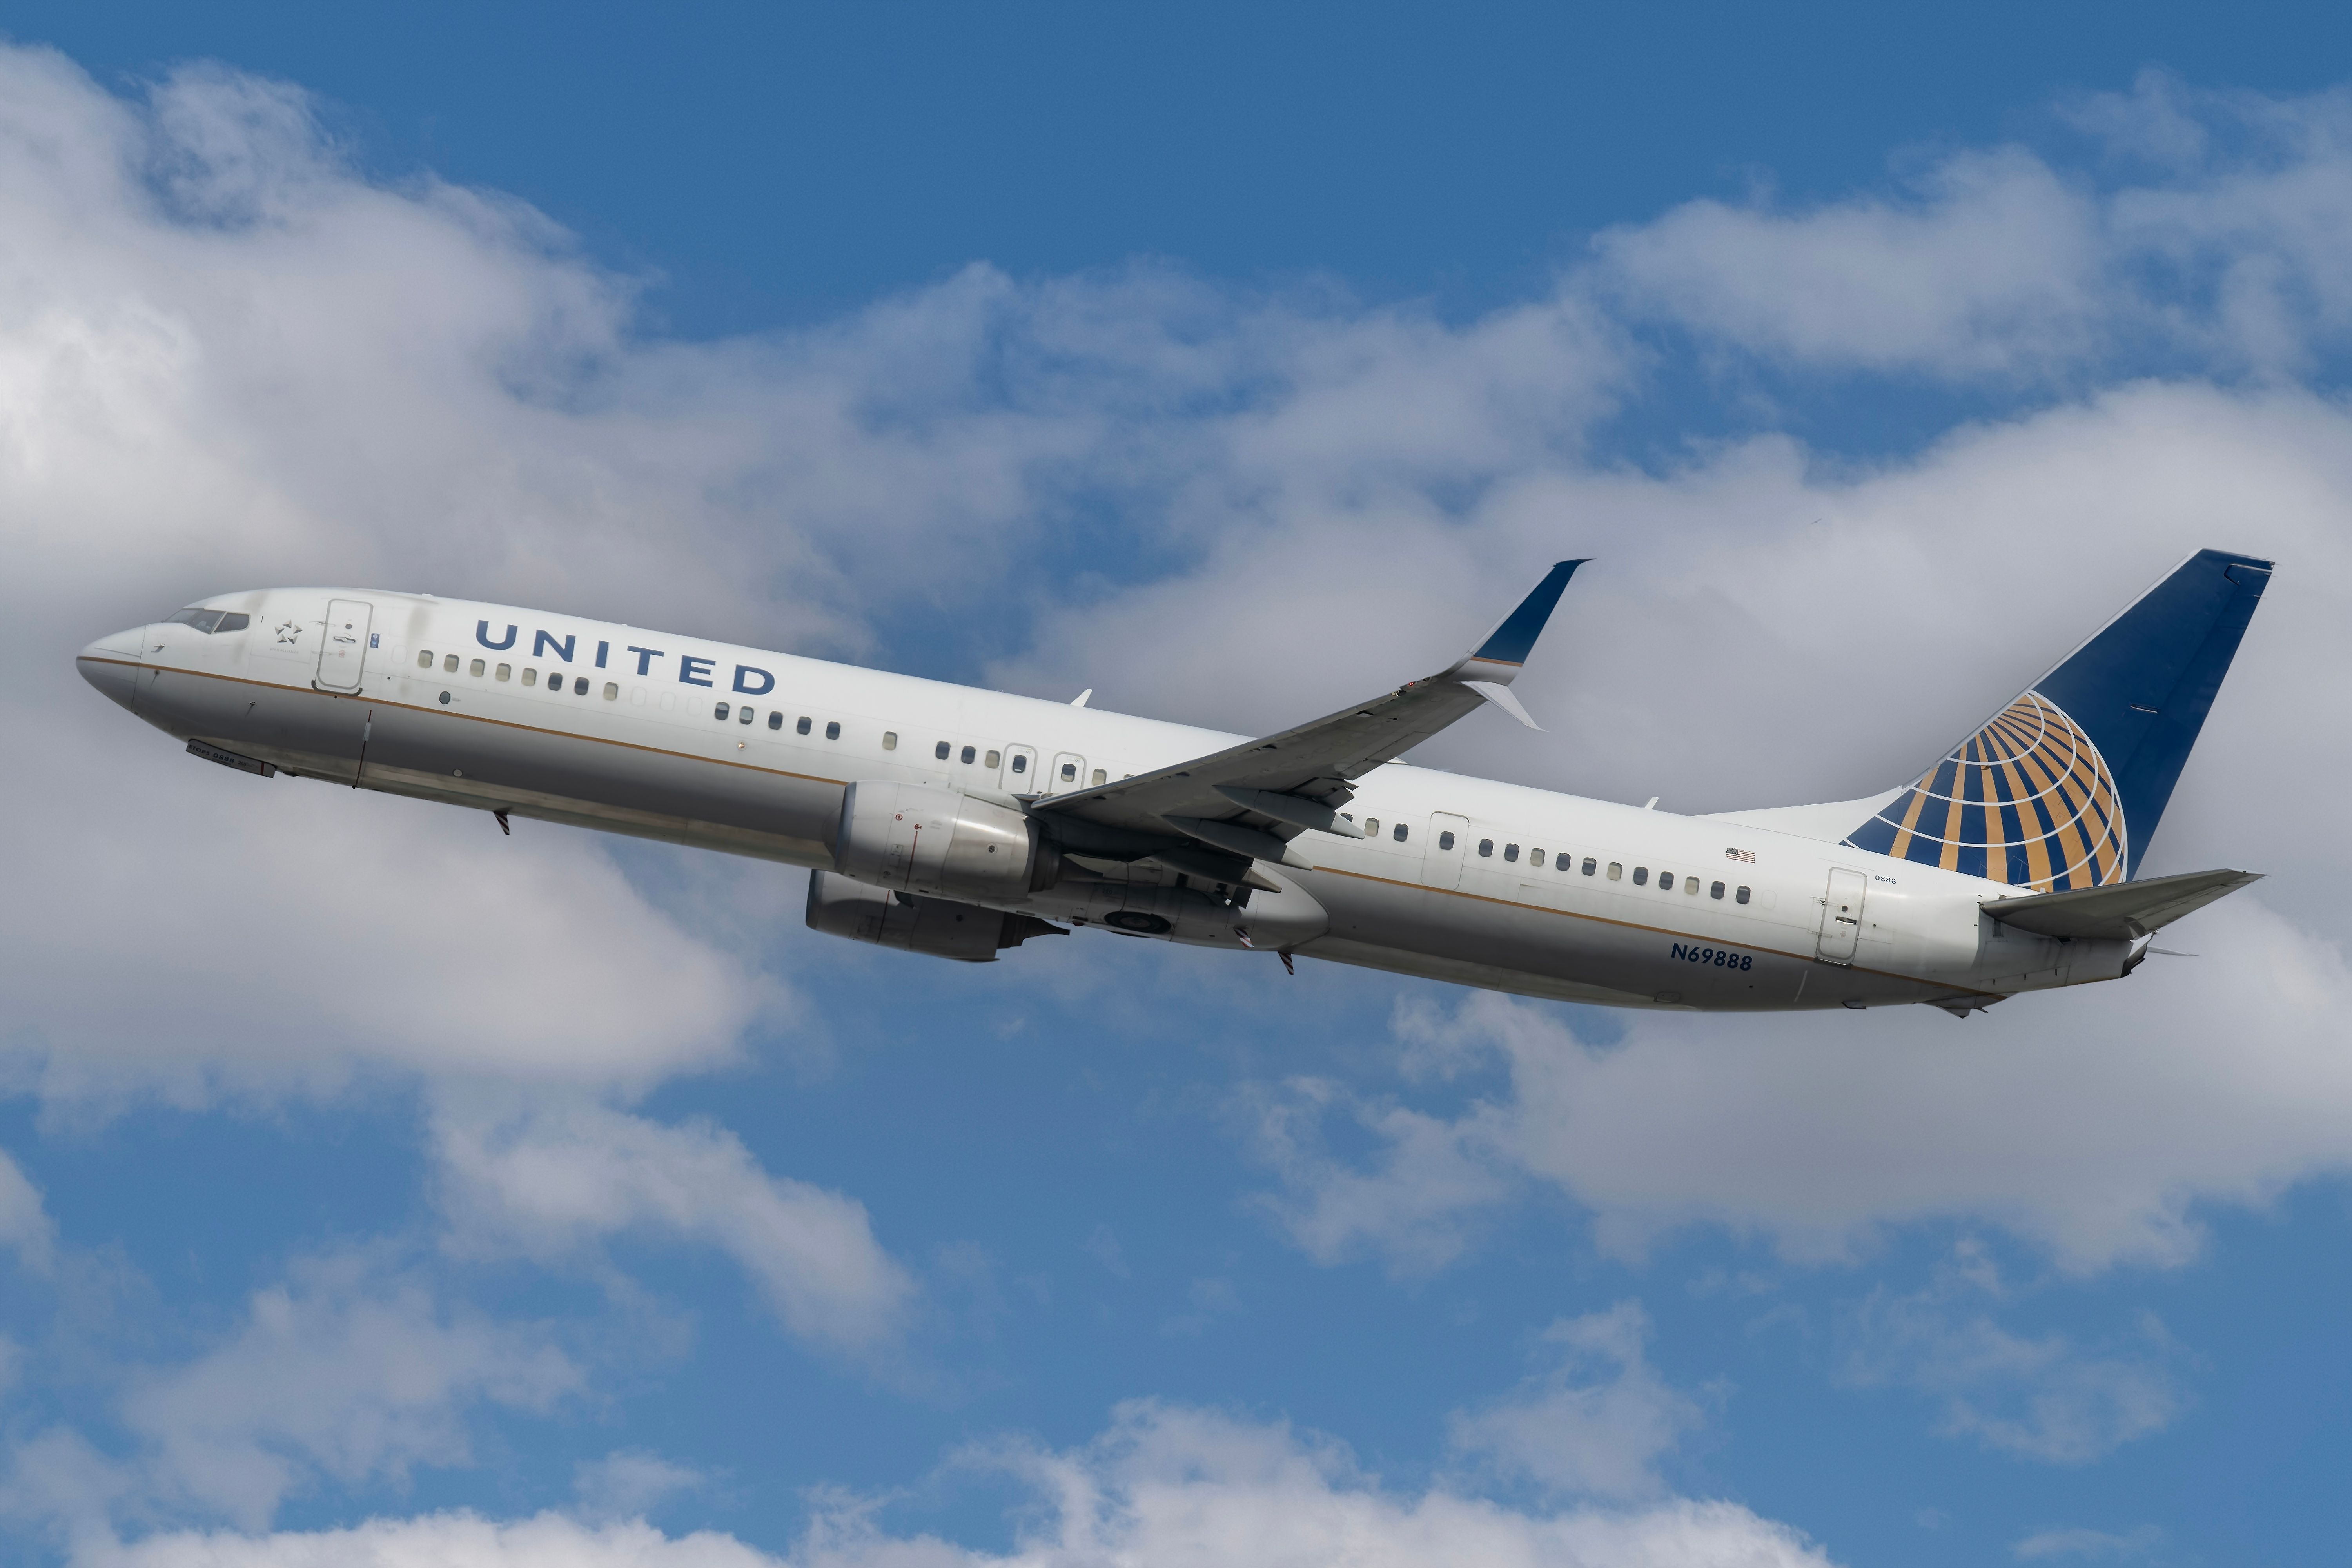 United Airlines Boeing 737-924/ER taking off from Los Angeles International Airport.